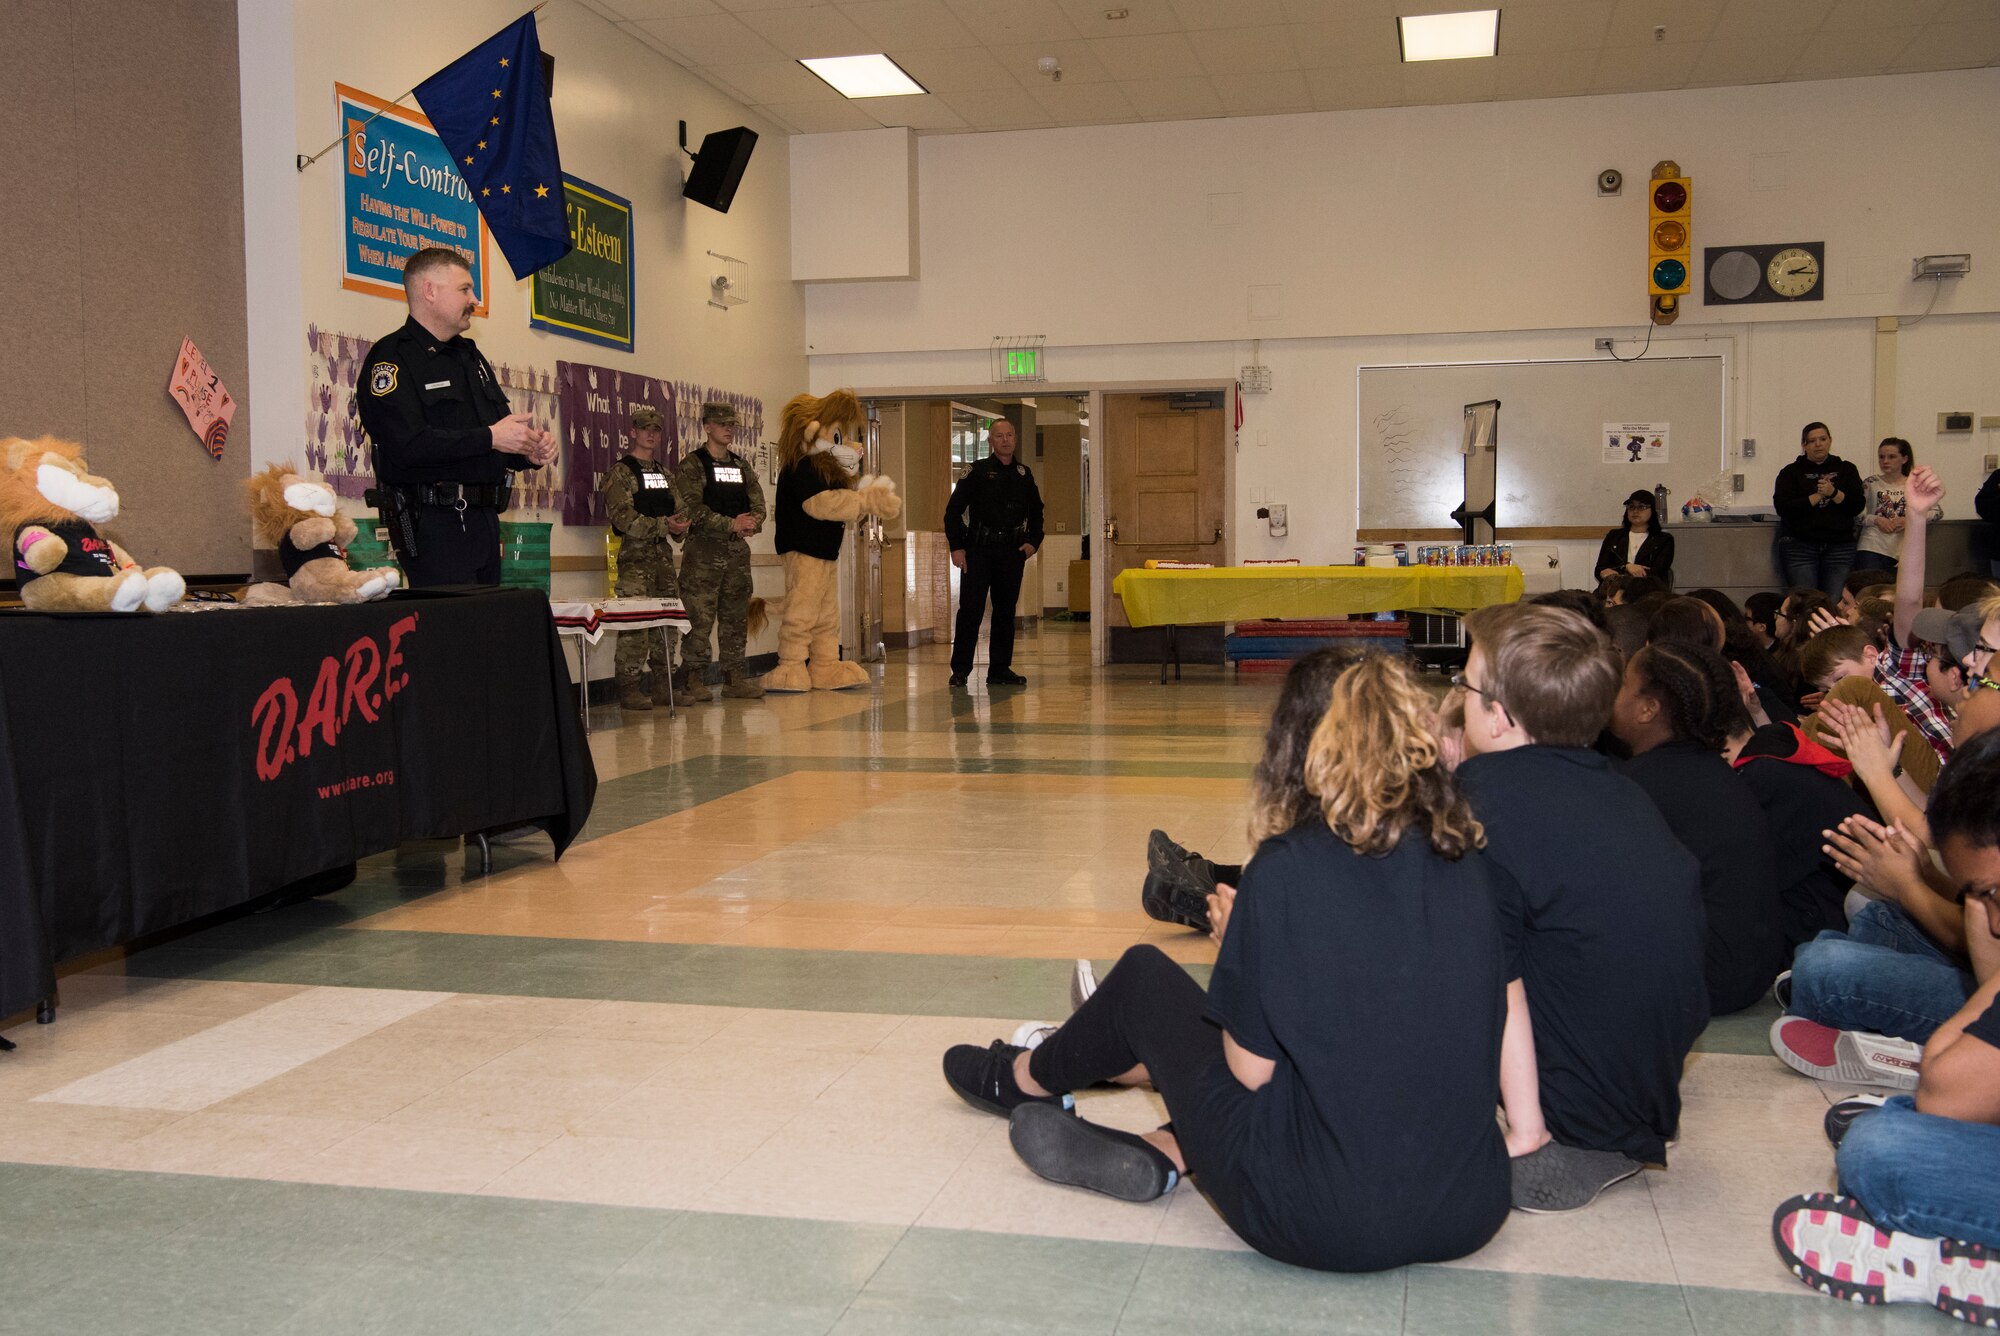 Michael J. Crerend, lead police officer with the 673d Security Forces Squadron and Drug Abuse Resistance Education officer, speaks with students from the D.A.R.E. program at Ursa Major Elementary School at Joint Base Elmendorf-Richardson, Alaska, May 2, 2018. D.A.R.E. is a program designed to provide students with the knowledge and tools they need to resist drugs, alcohol and other high-risk behaviors.